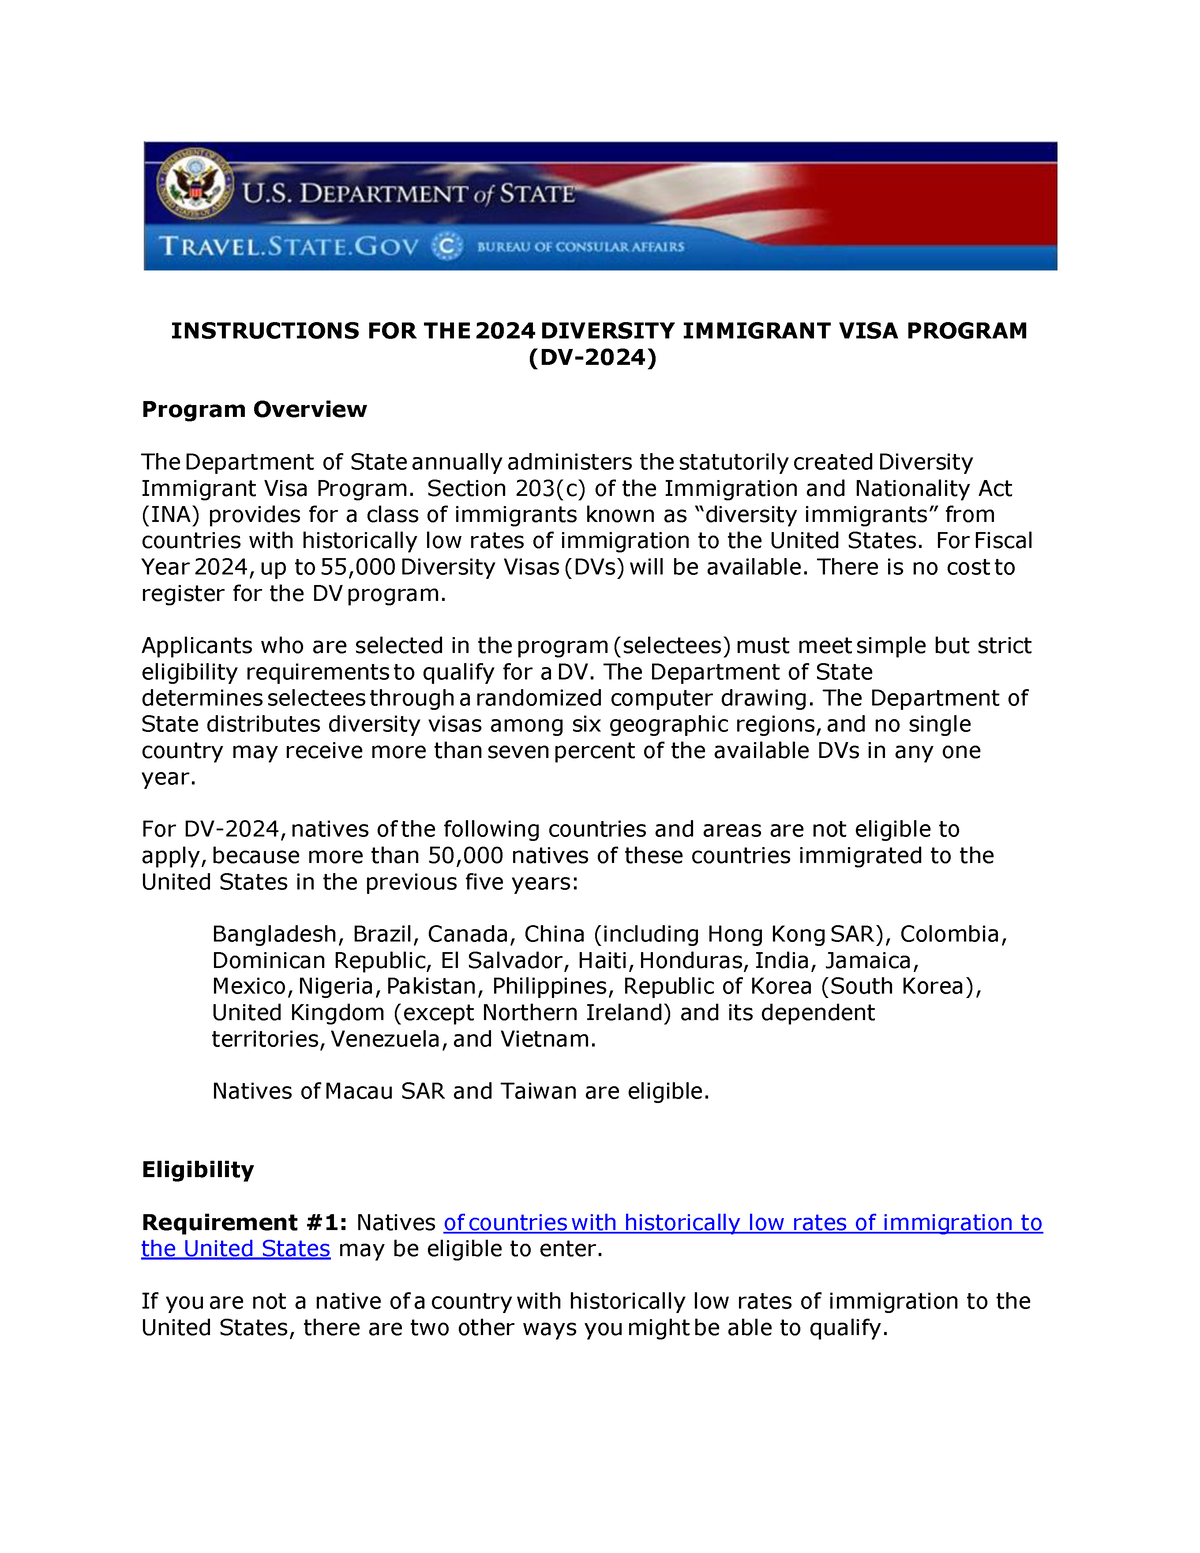 DV2024Instructions INSTRUCTIONS FOR THE 202 4 DIVERSITY IMMIGRANT